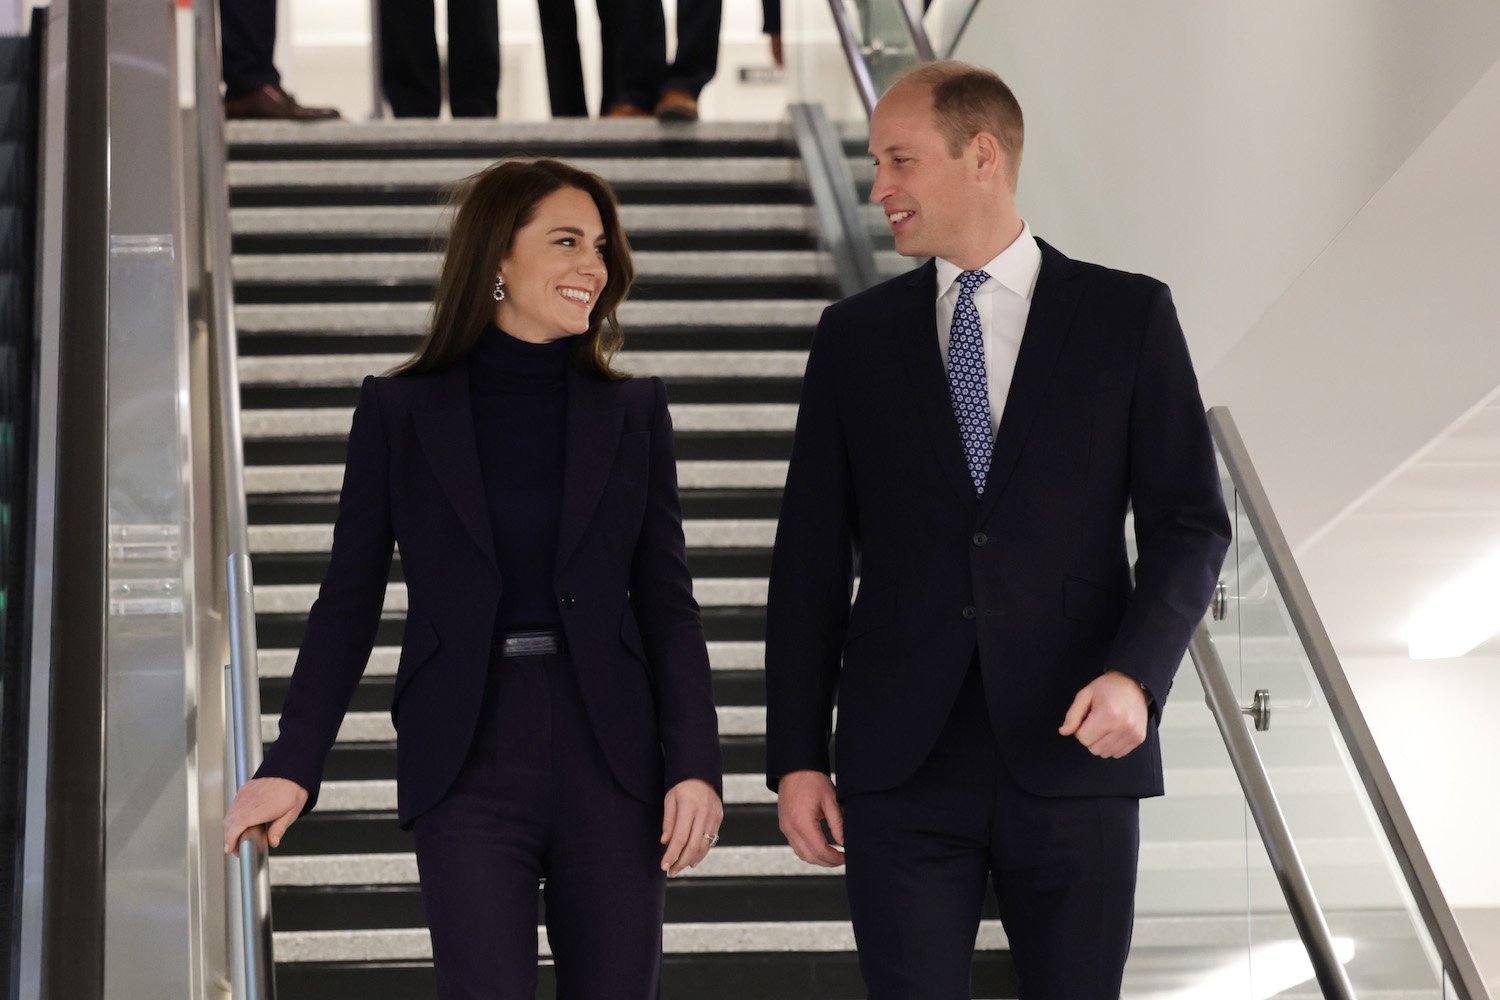 Prince William and Kate Middleton body language was on display when they landed in Boston for a three day tour including the Earthshot Prize Awards